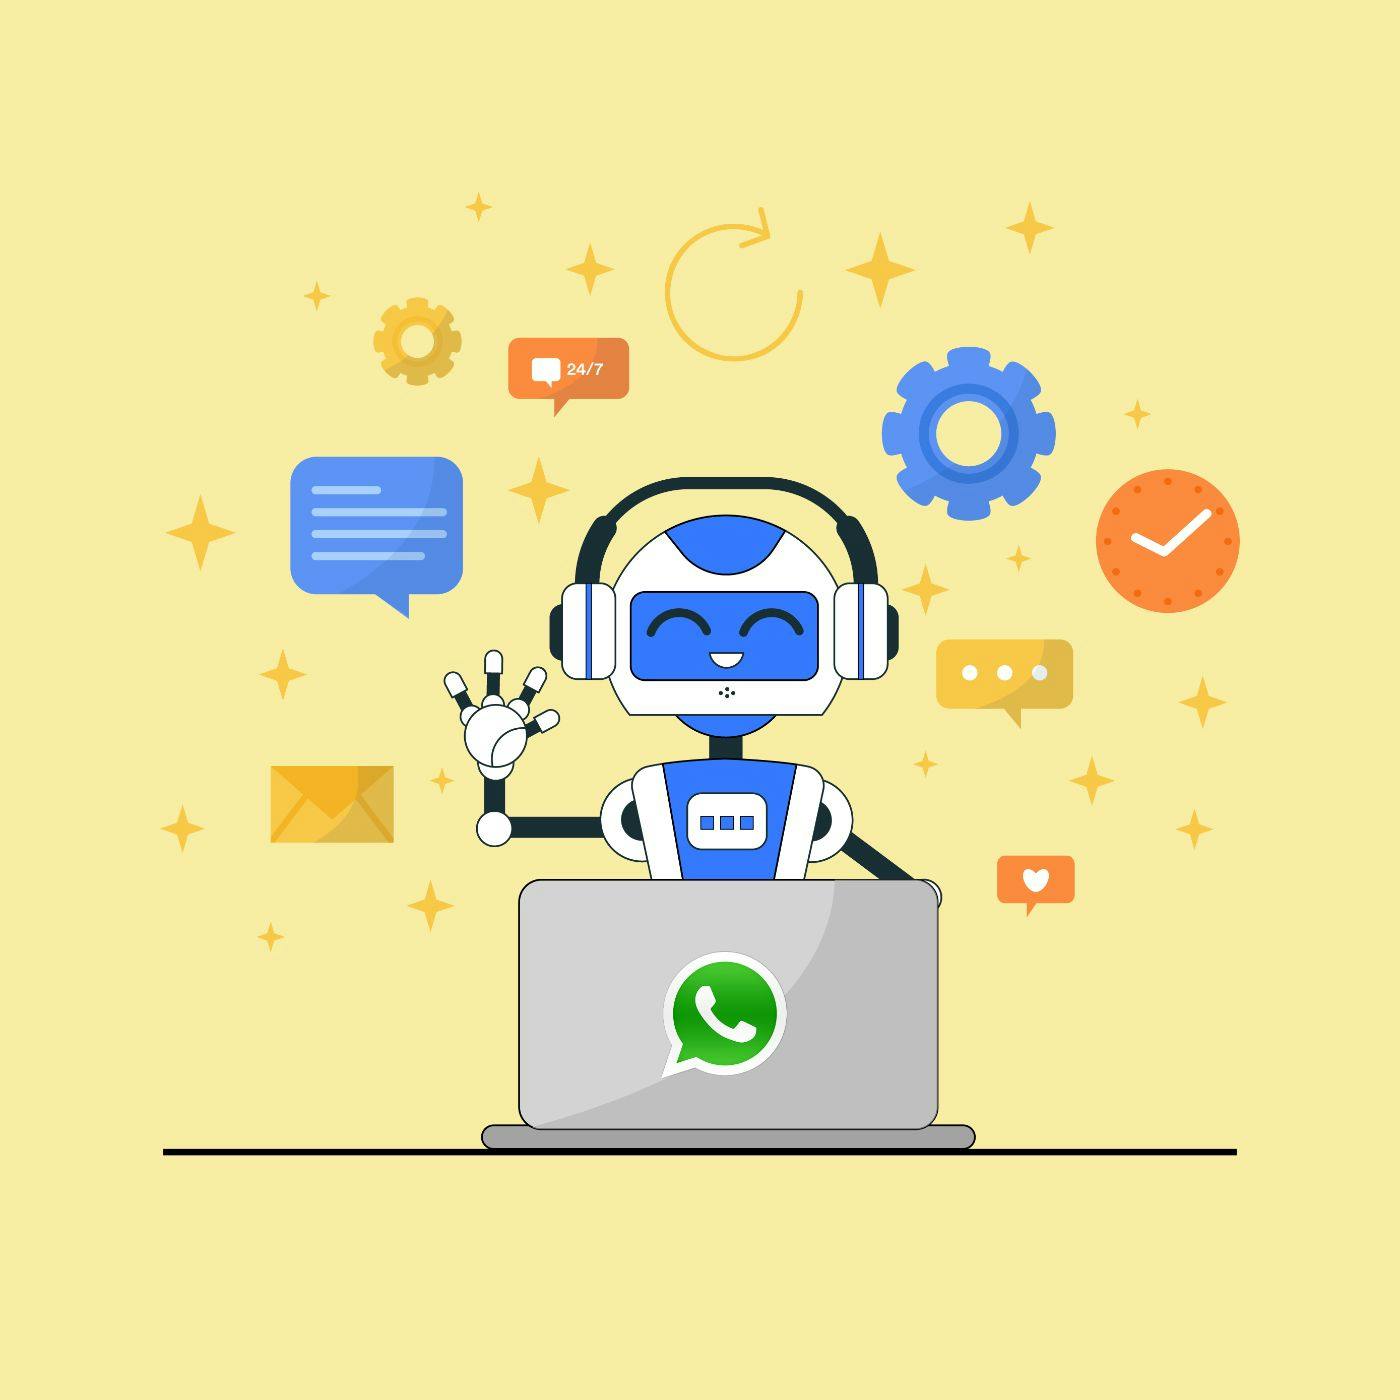 /8-ways-you-can-use-whatsapp-to-improve-customer-service feature image